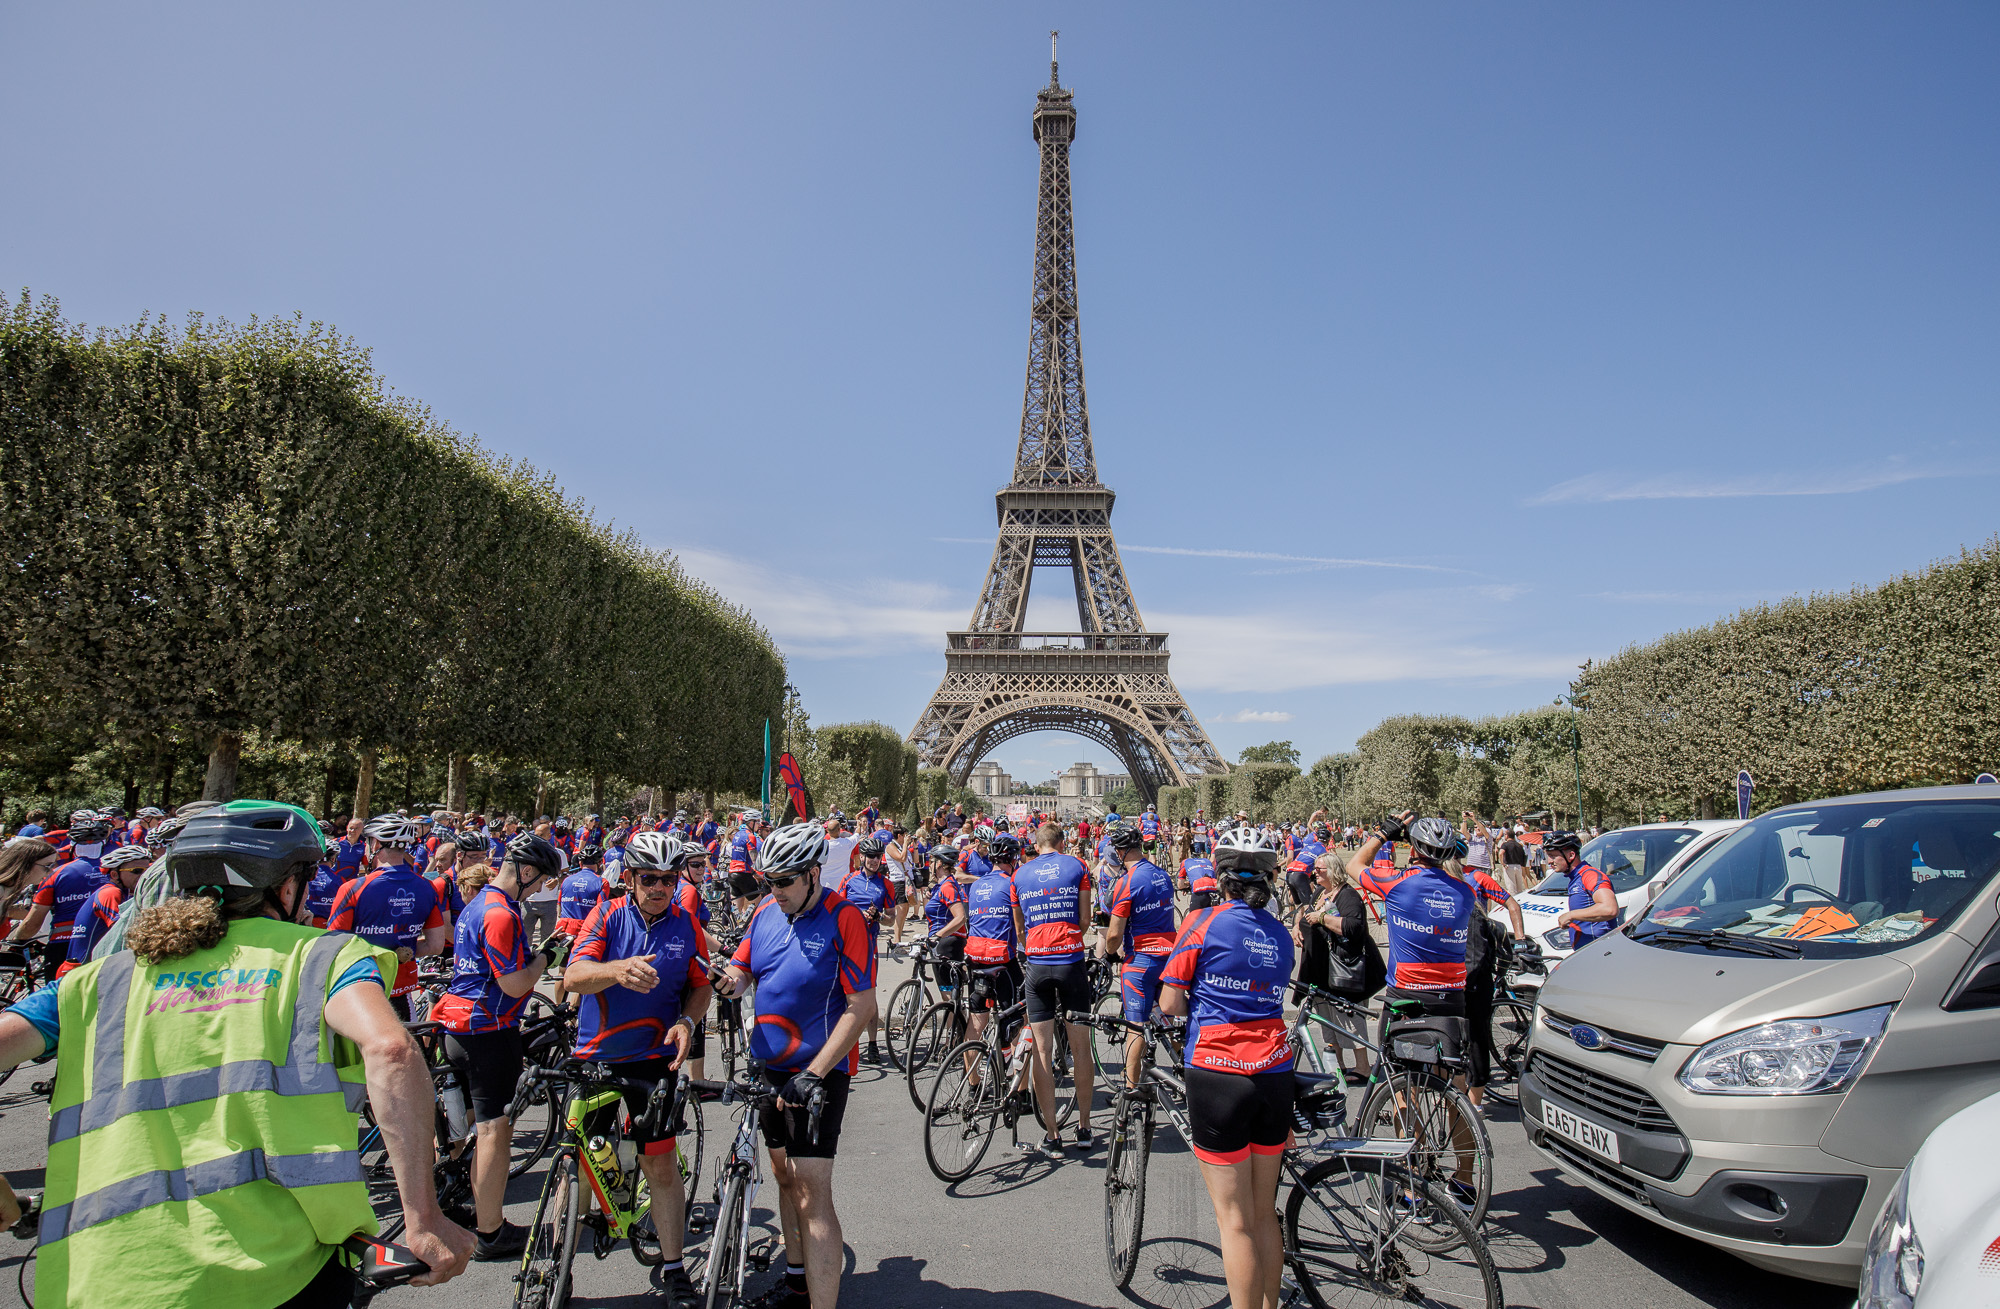 London to Paris Cycle Challenge 2018 - Finishing at Eiffel Tower